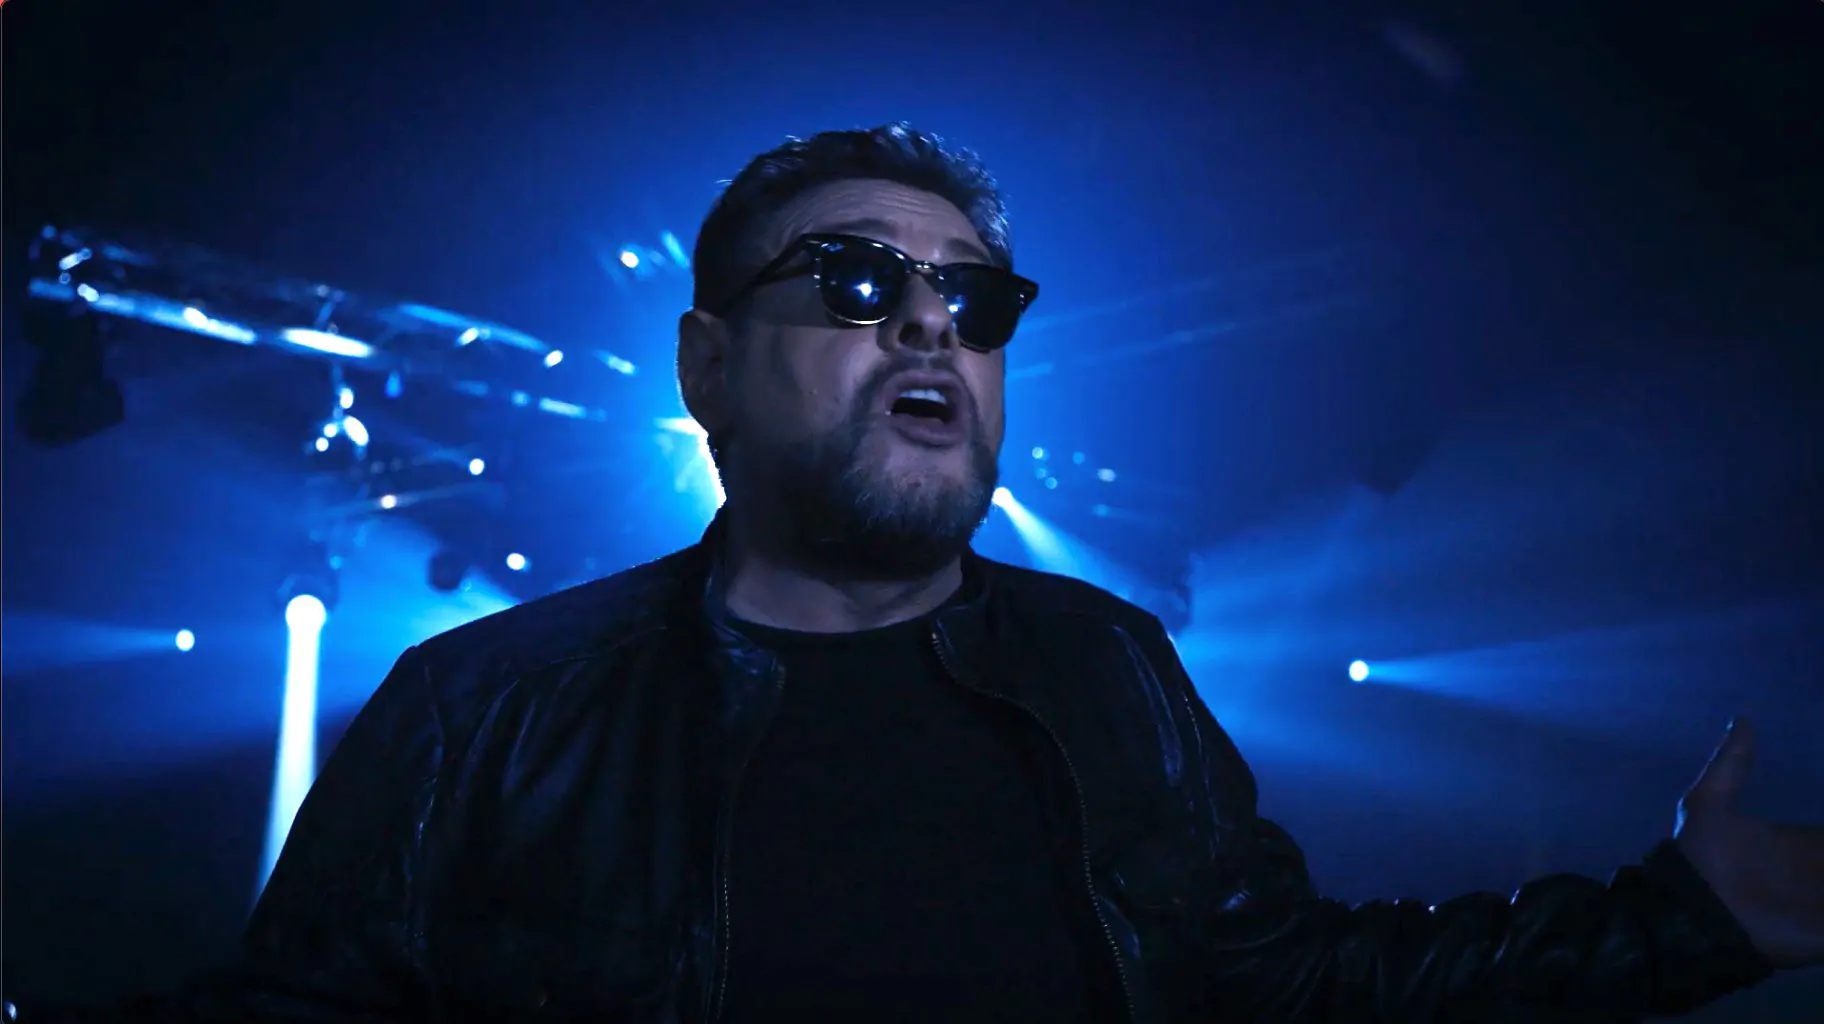 SHAUN RYDER releases ‘Pop Star’s Daughters’ from his new solo album ‘Visits From Future Technology’ – Watch Video!